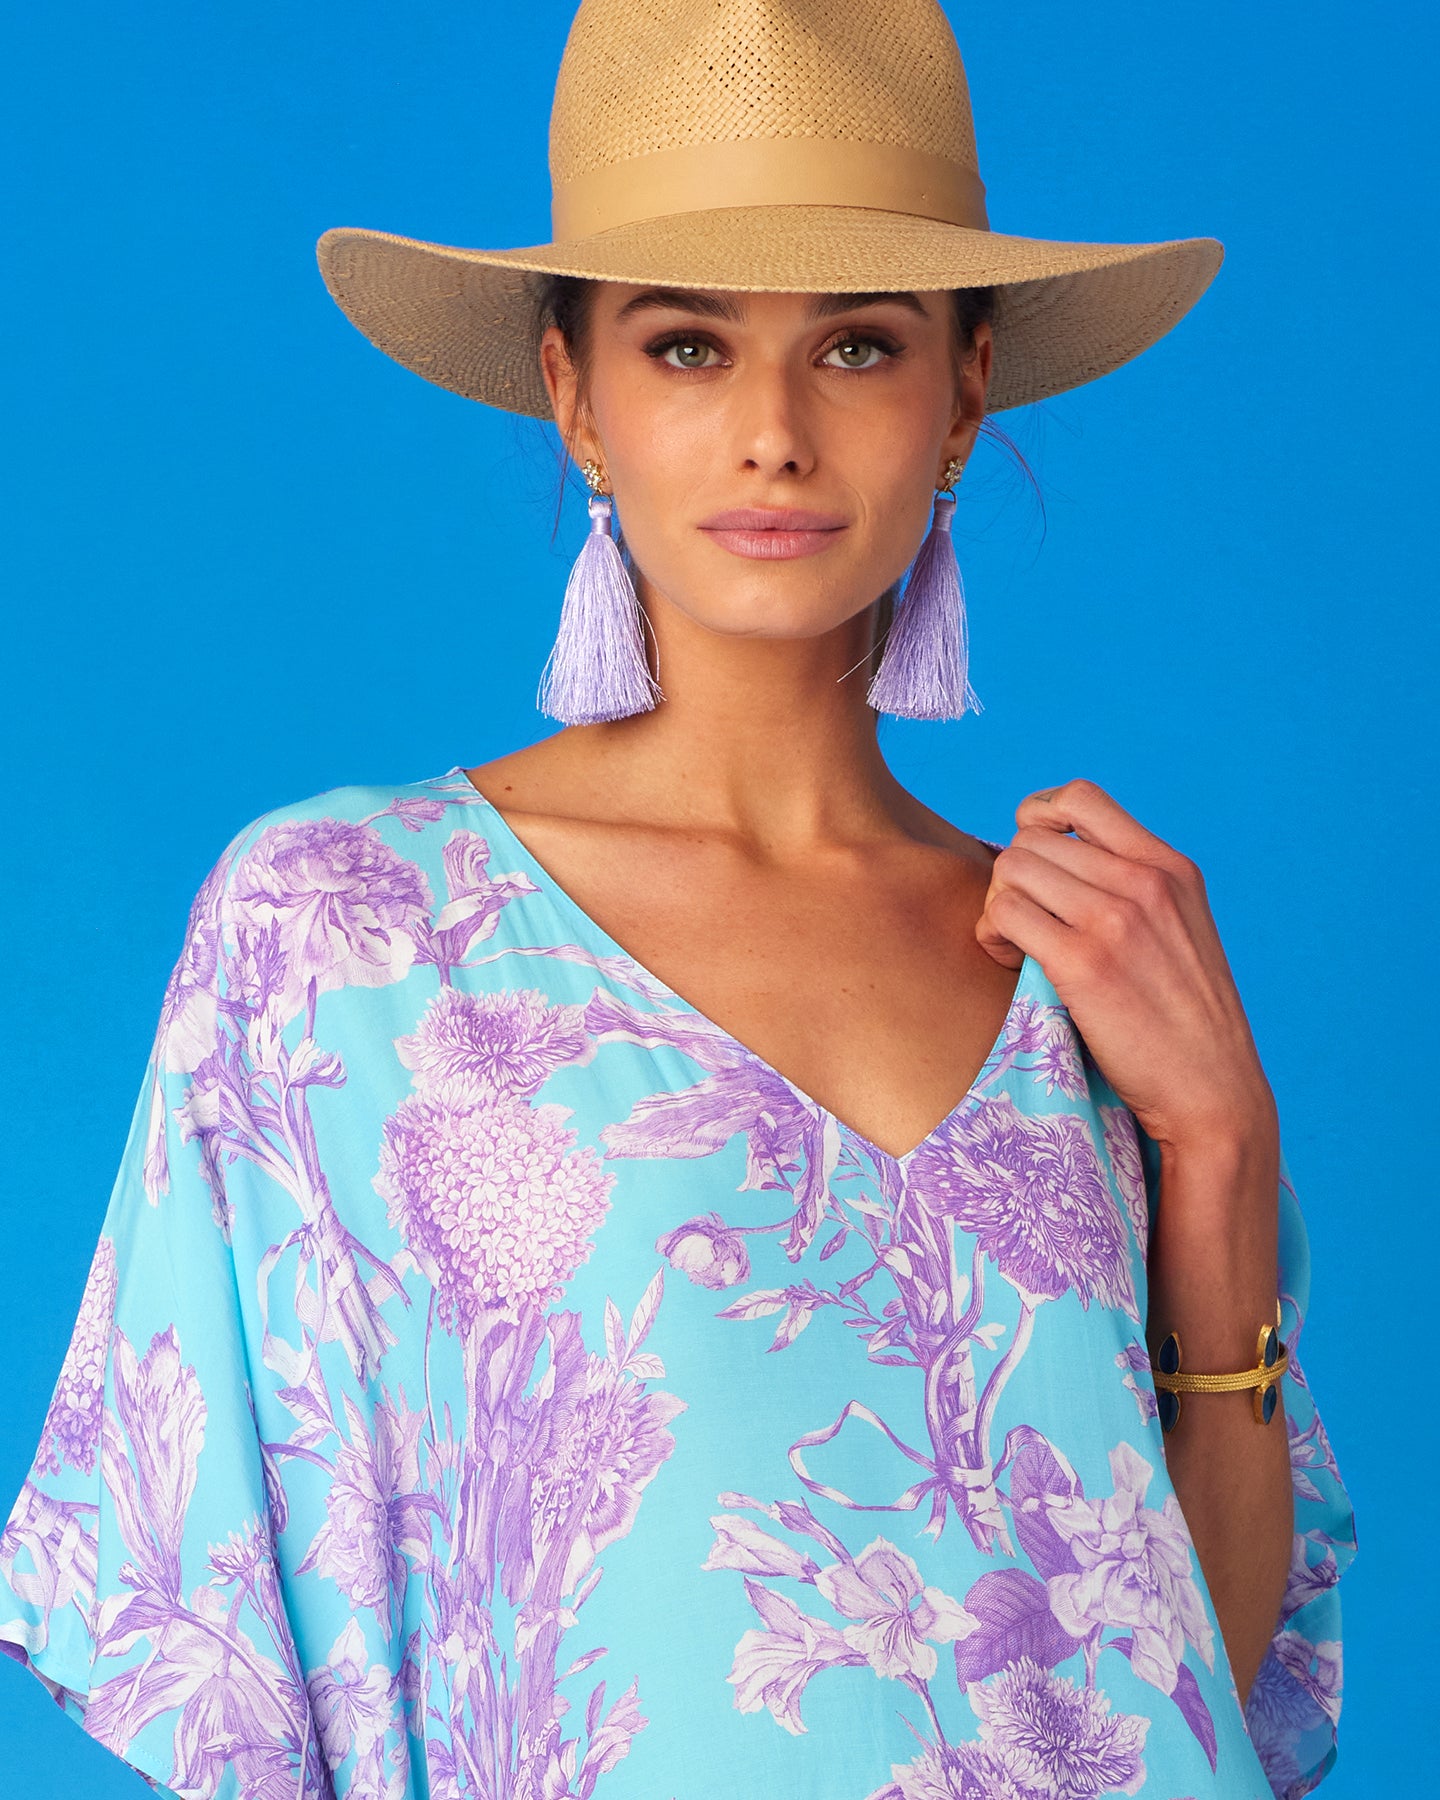 Camille Kaftan in Turquoise and Purple Floral Toile-Portrait